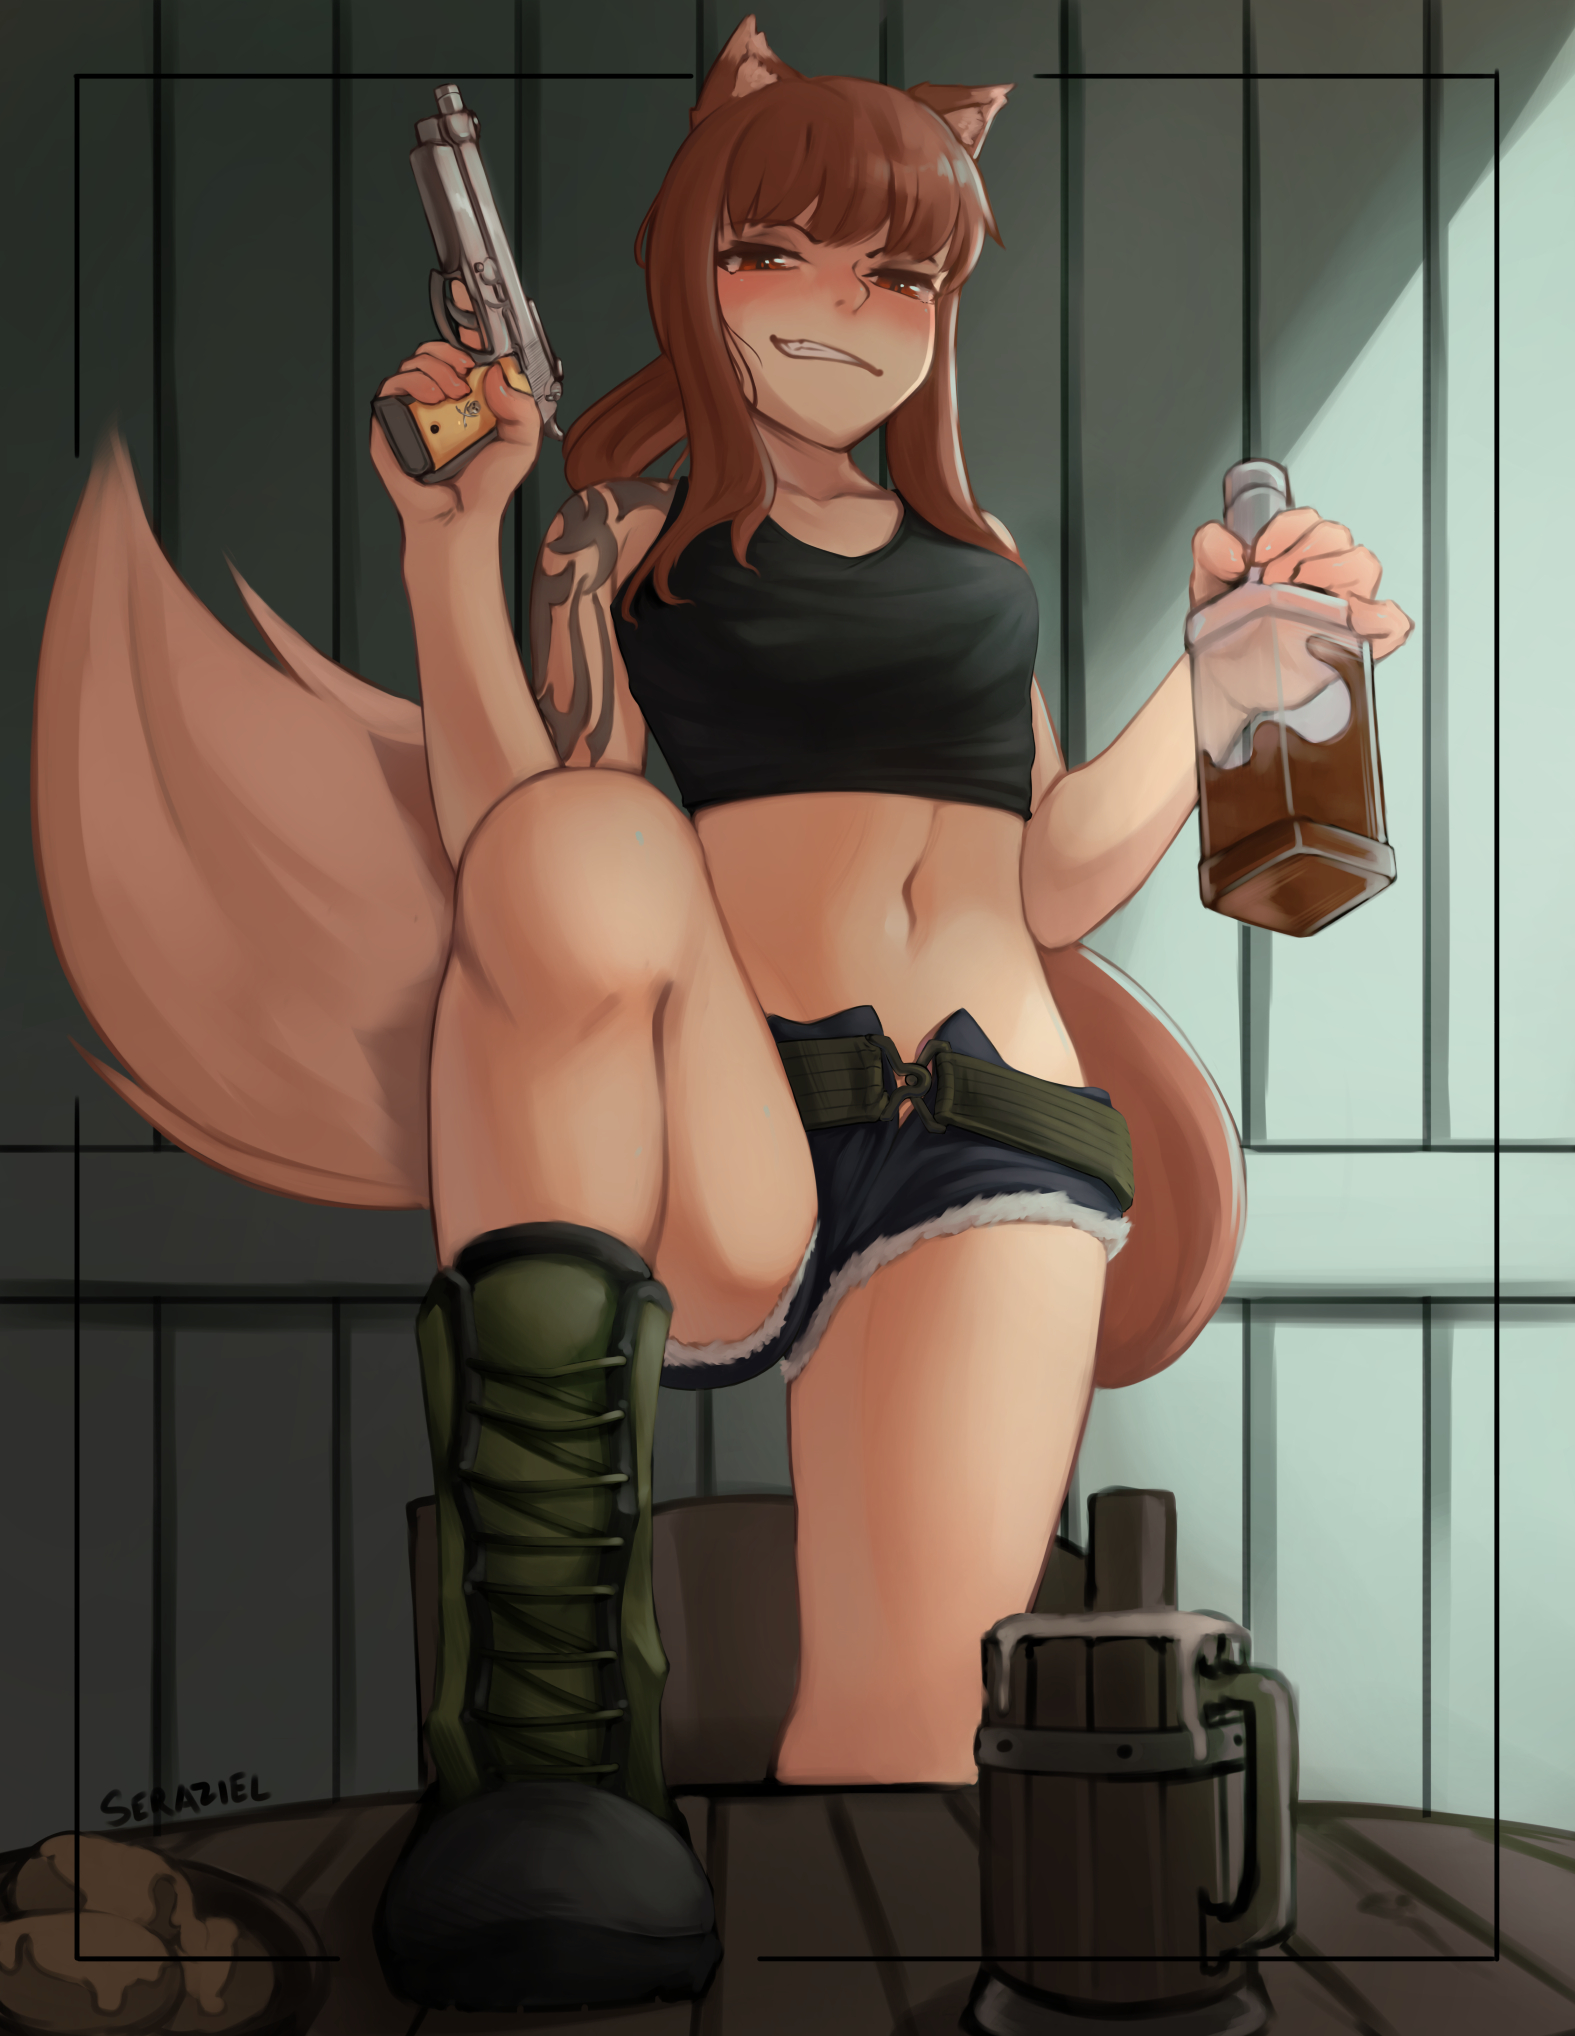 Anime 1575x2036 Black Lagoon Spice and Wolf crossover girls with guns inked girls small boobs jean shorts bare shoulders open shorts black top long hair ponytail 2D anime girls alcohol drinking black boots smiling thighs thick thigh Revy Holo (Spice and Wolf) underboob belly button the gap no bra portrait display brunette looking at viewer red eyes blushing drunk leg up fan art curvy anime Beretta 92FS wolf girls